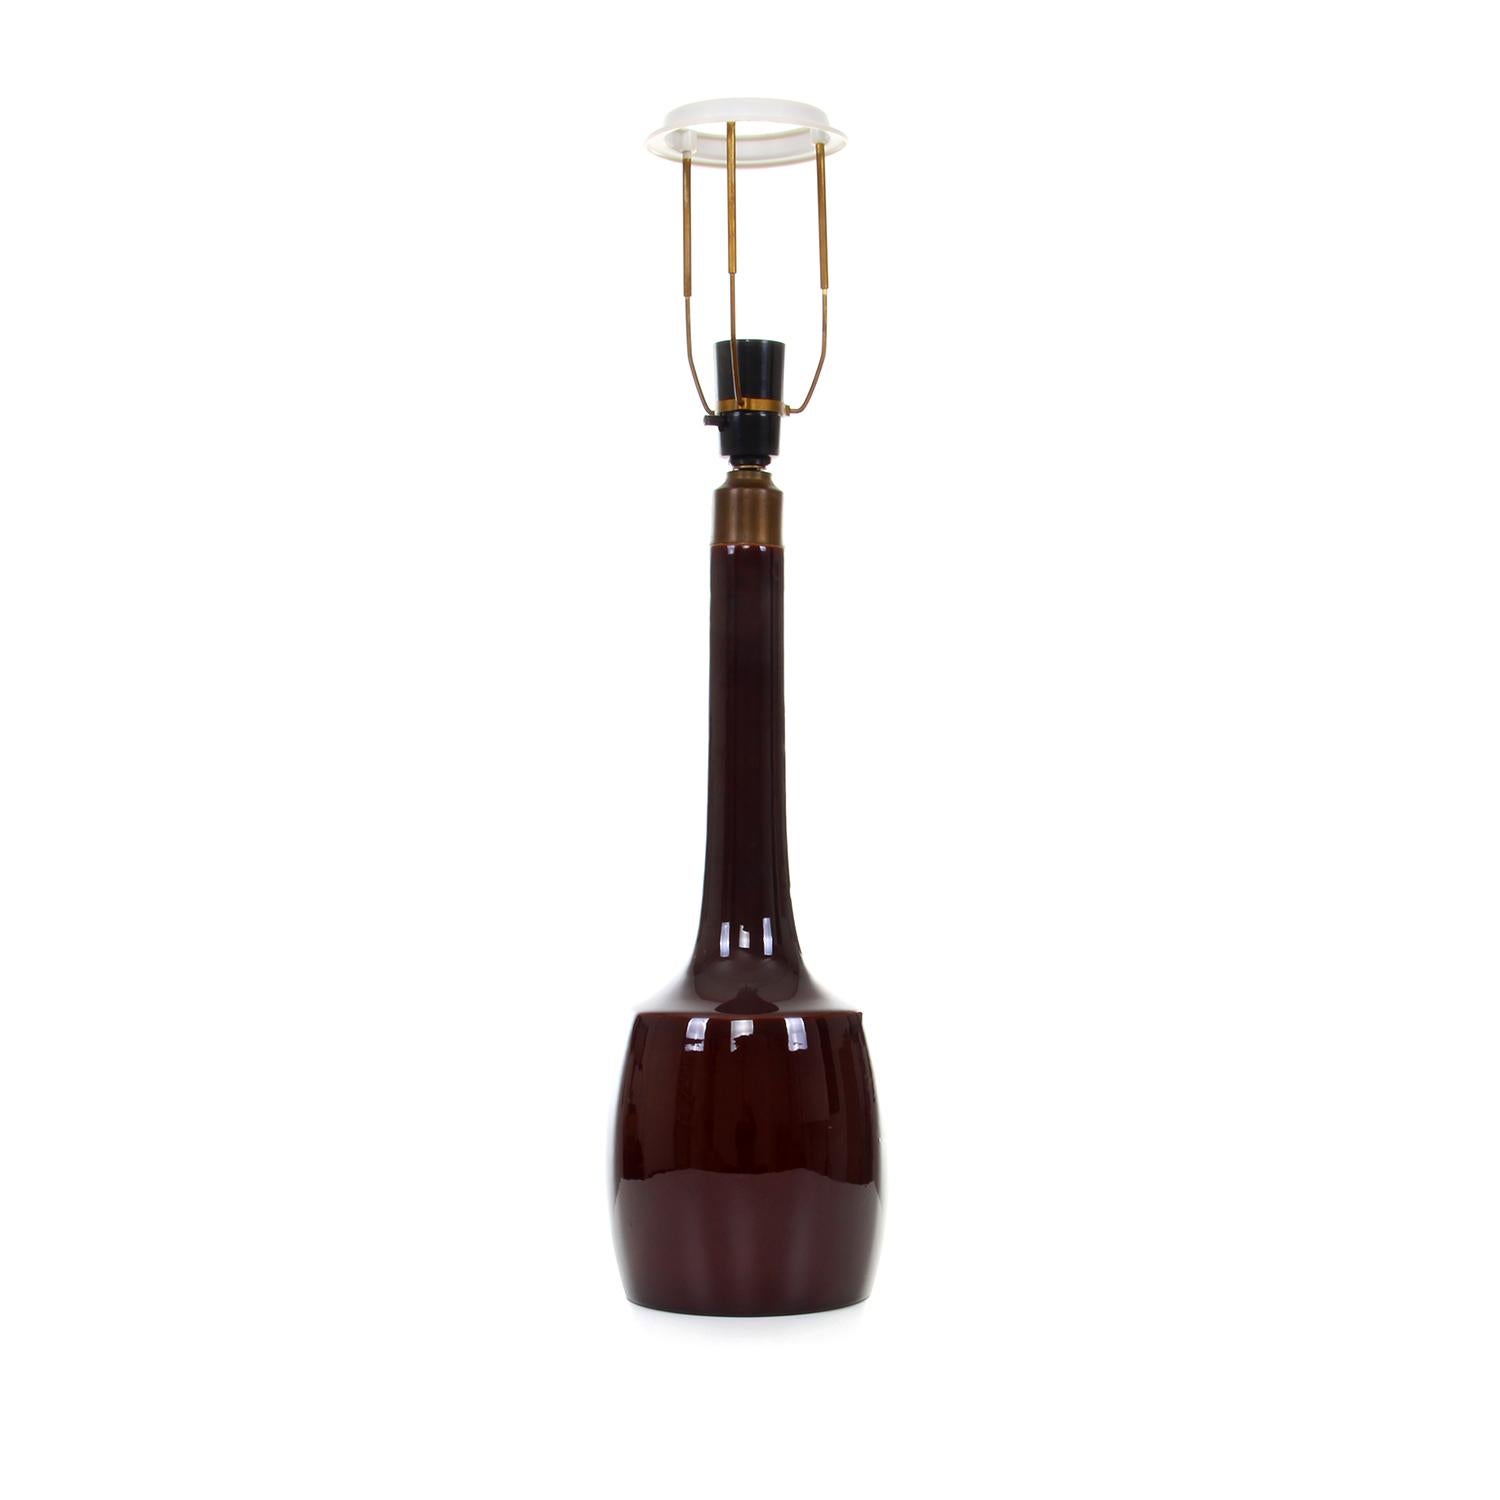 Tall Table Light by Knabstrup Keramik 1960s, Burgundy Ceramic Lamp with Shade In Good Condition In Brondby, Copenhagen